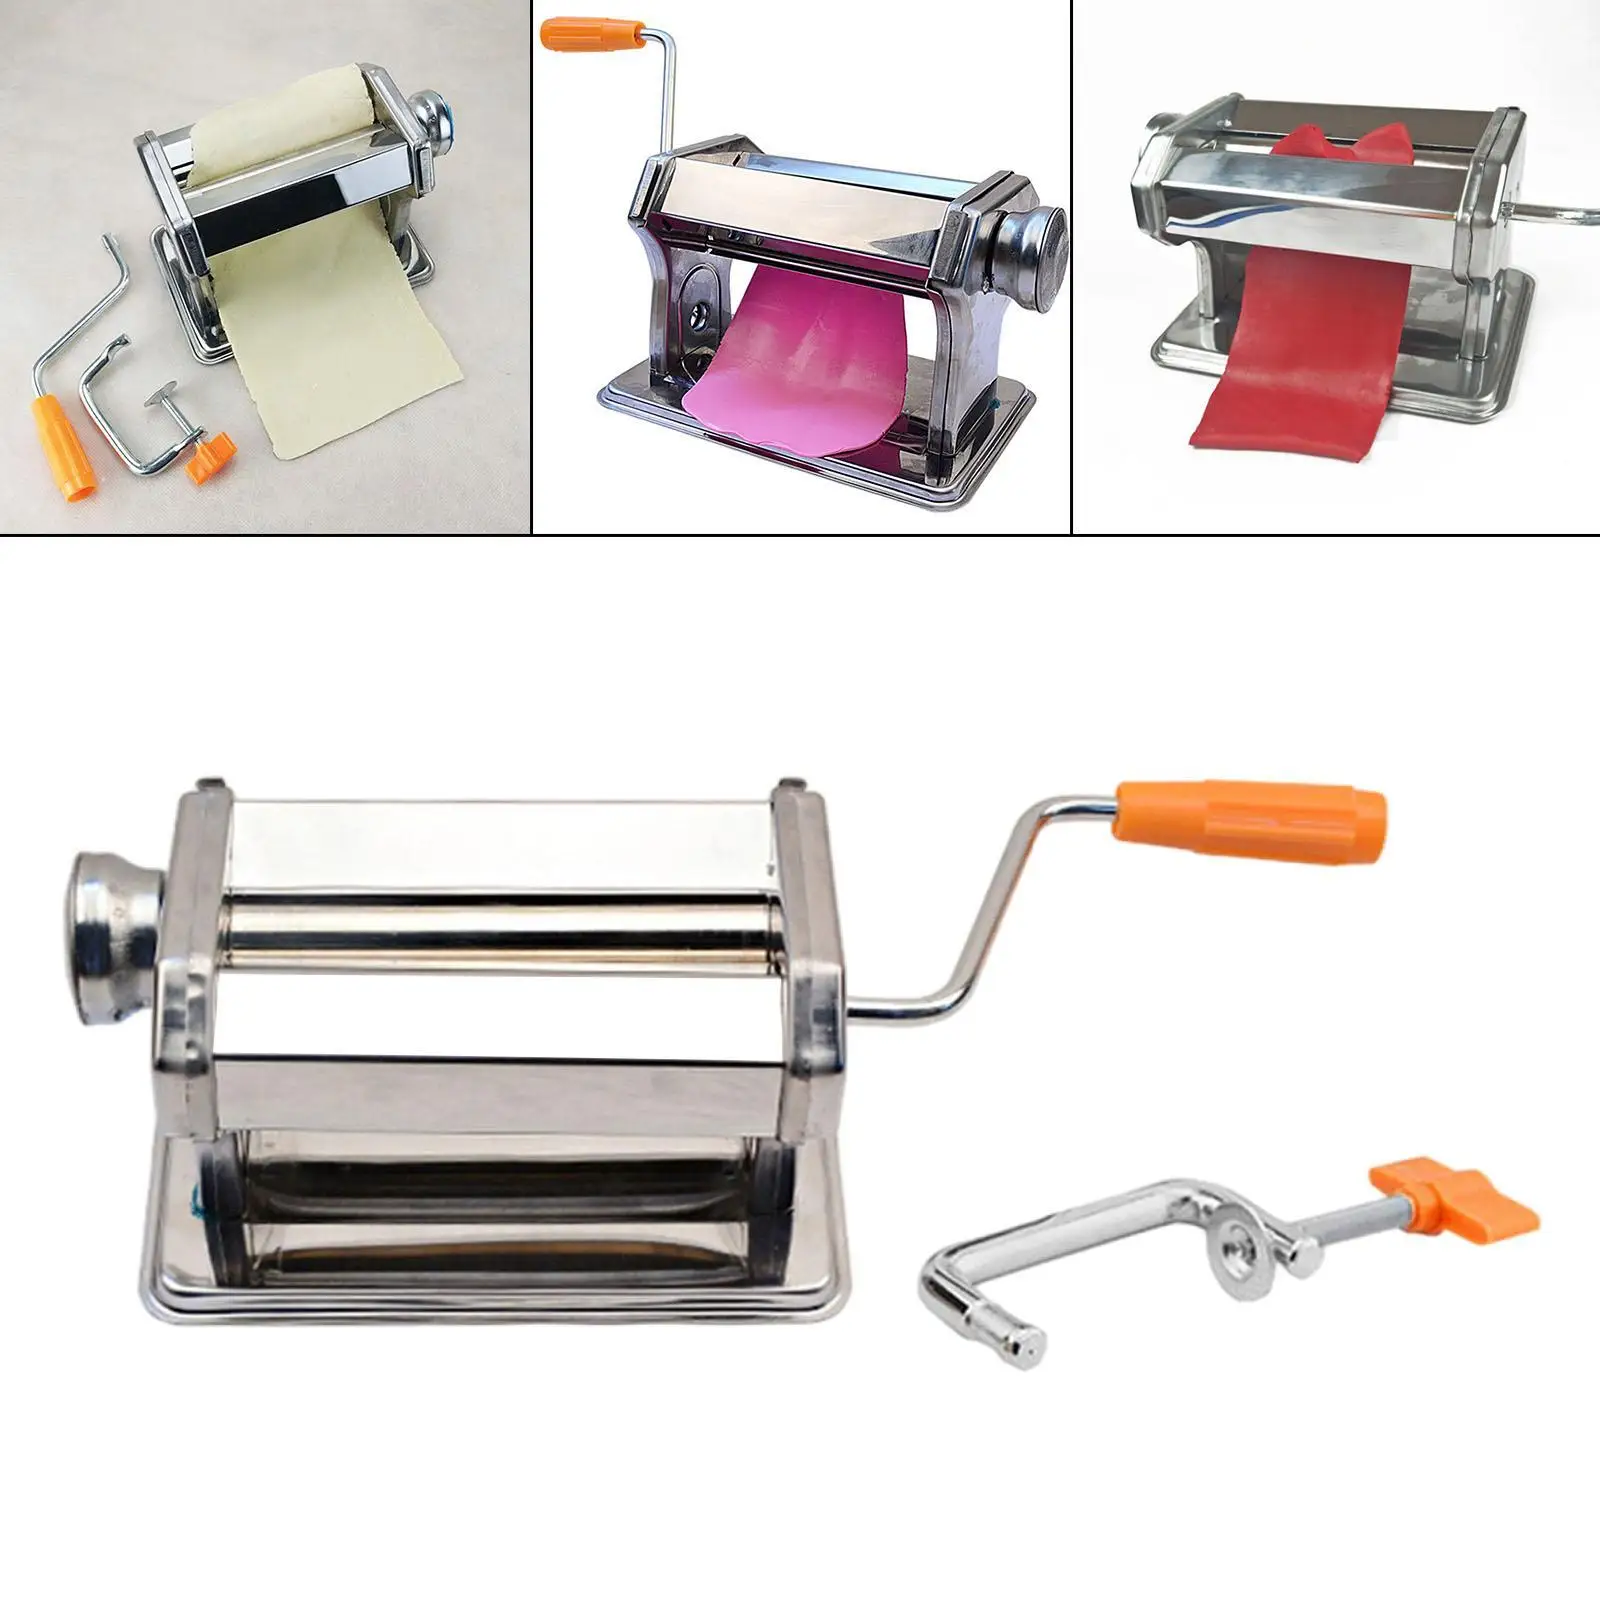 Polymer Clay Roller Machine Mixing Colors Manual Portable for